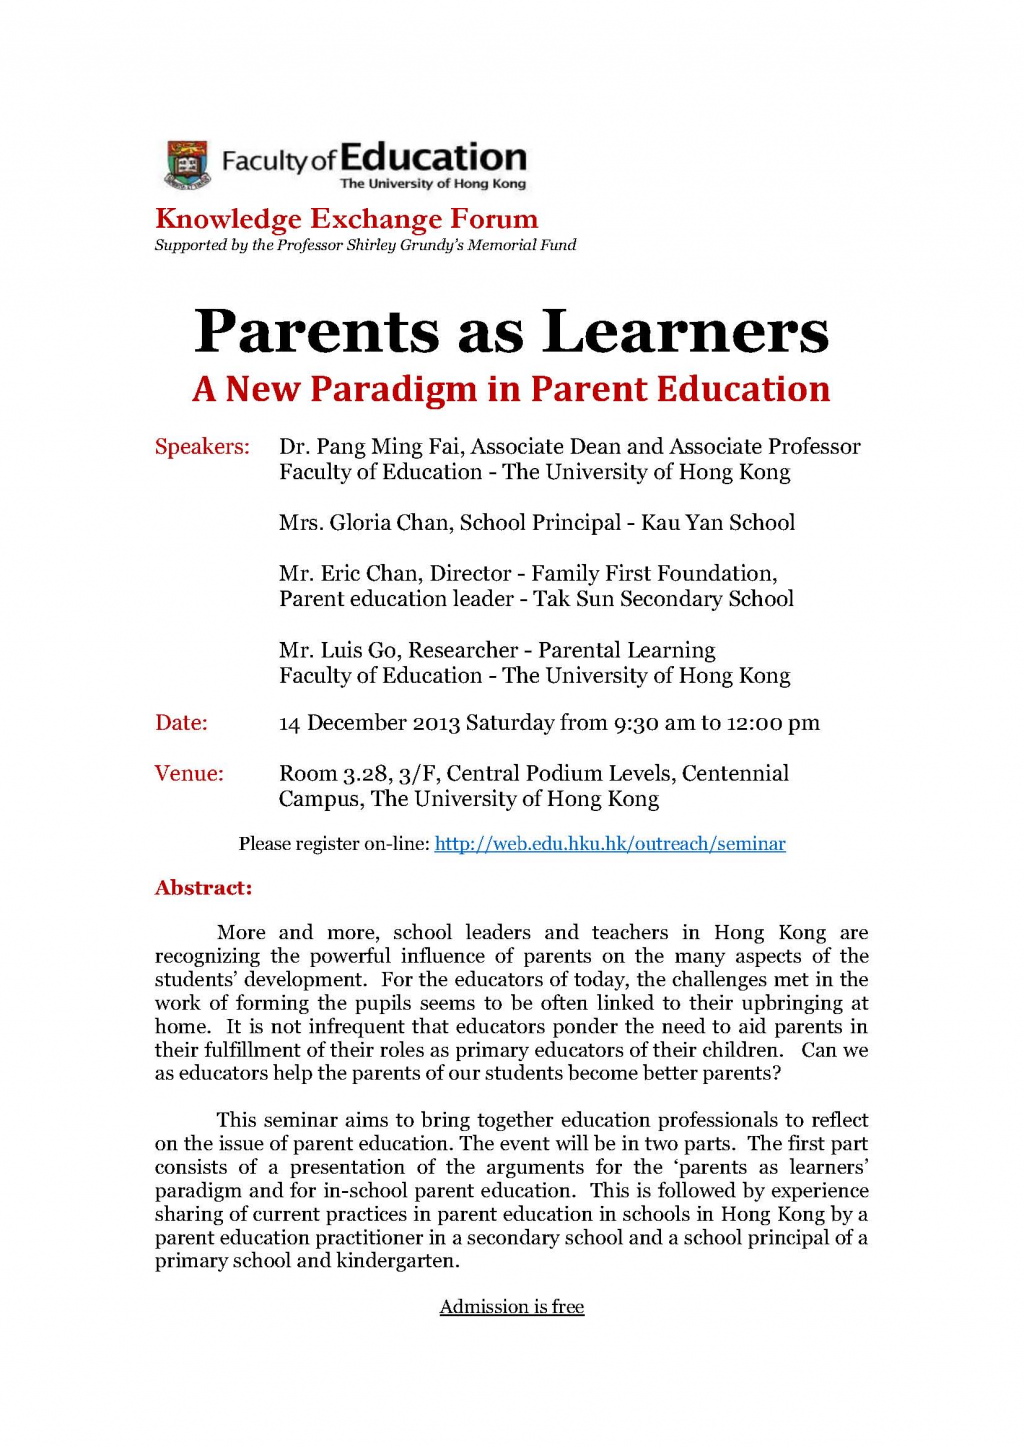 Parents as learners: A new paradigm in parent education